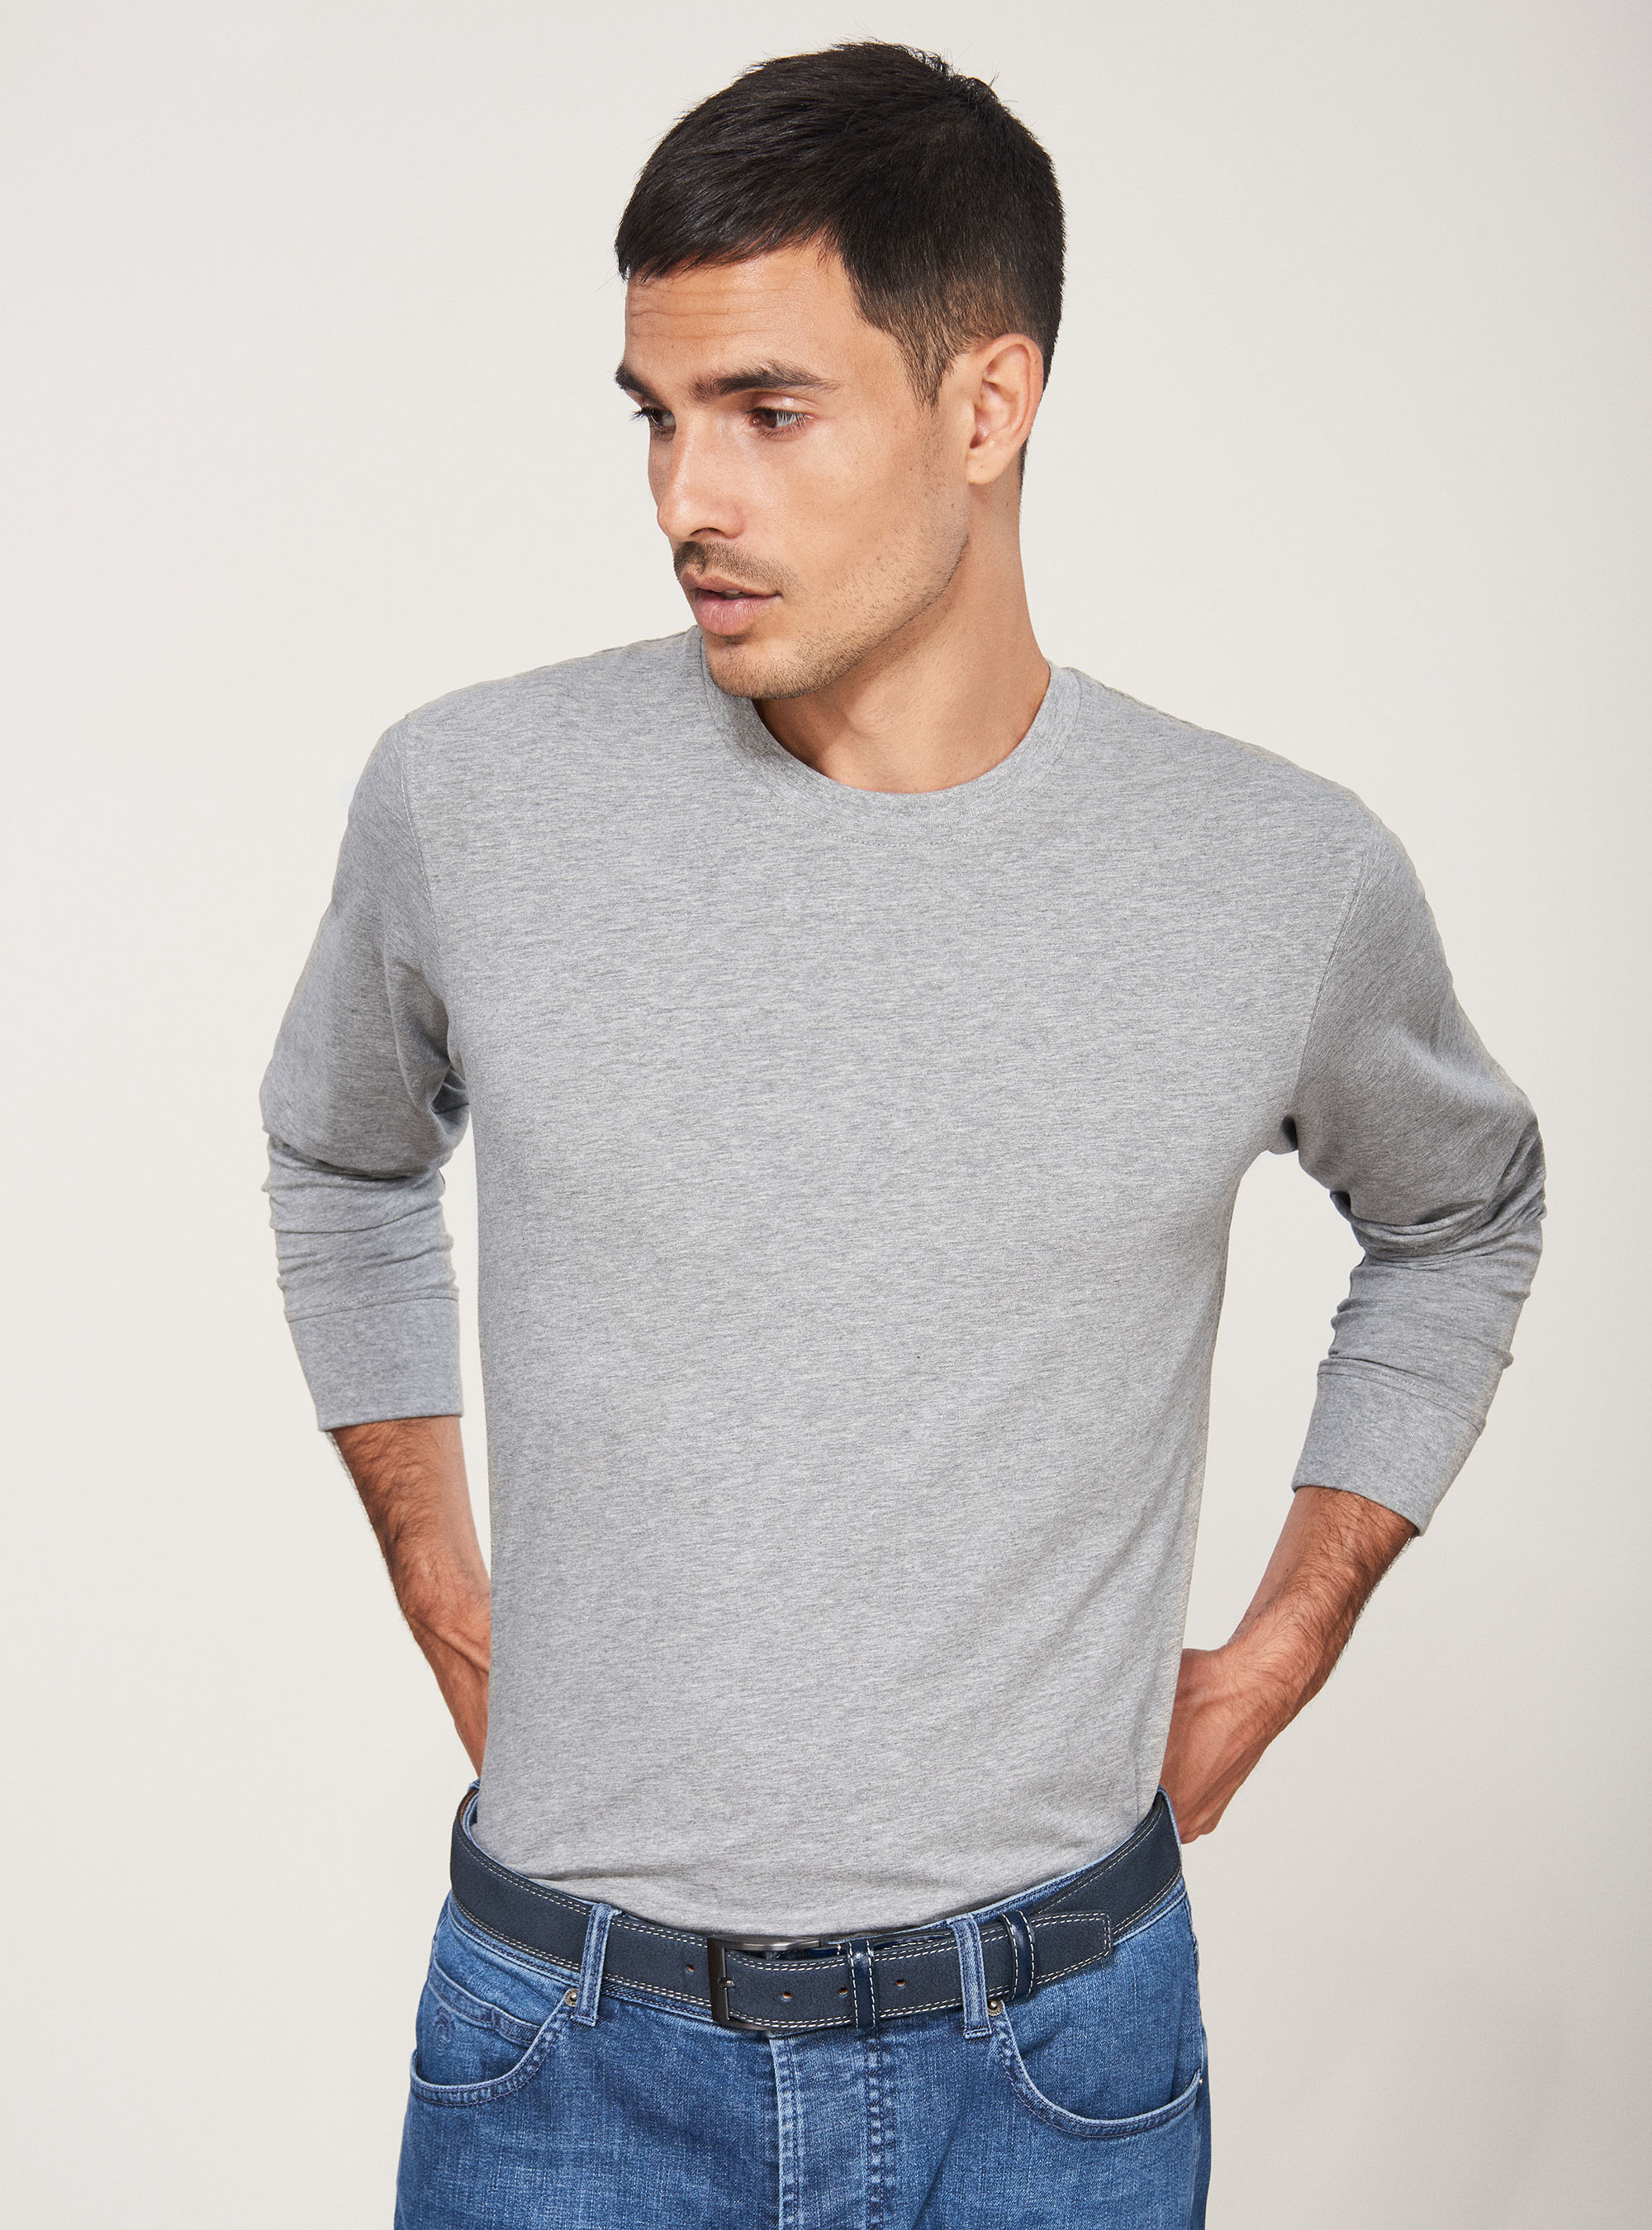 Long-sleeved stretch cotton T-shirt